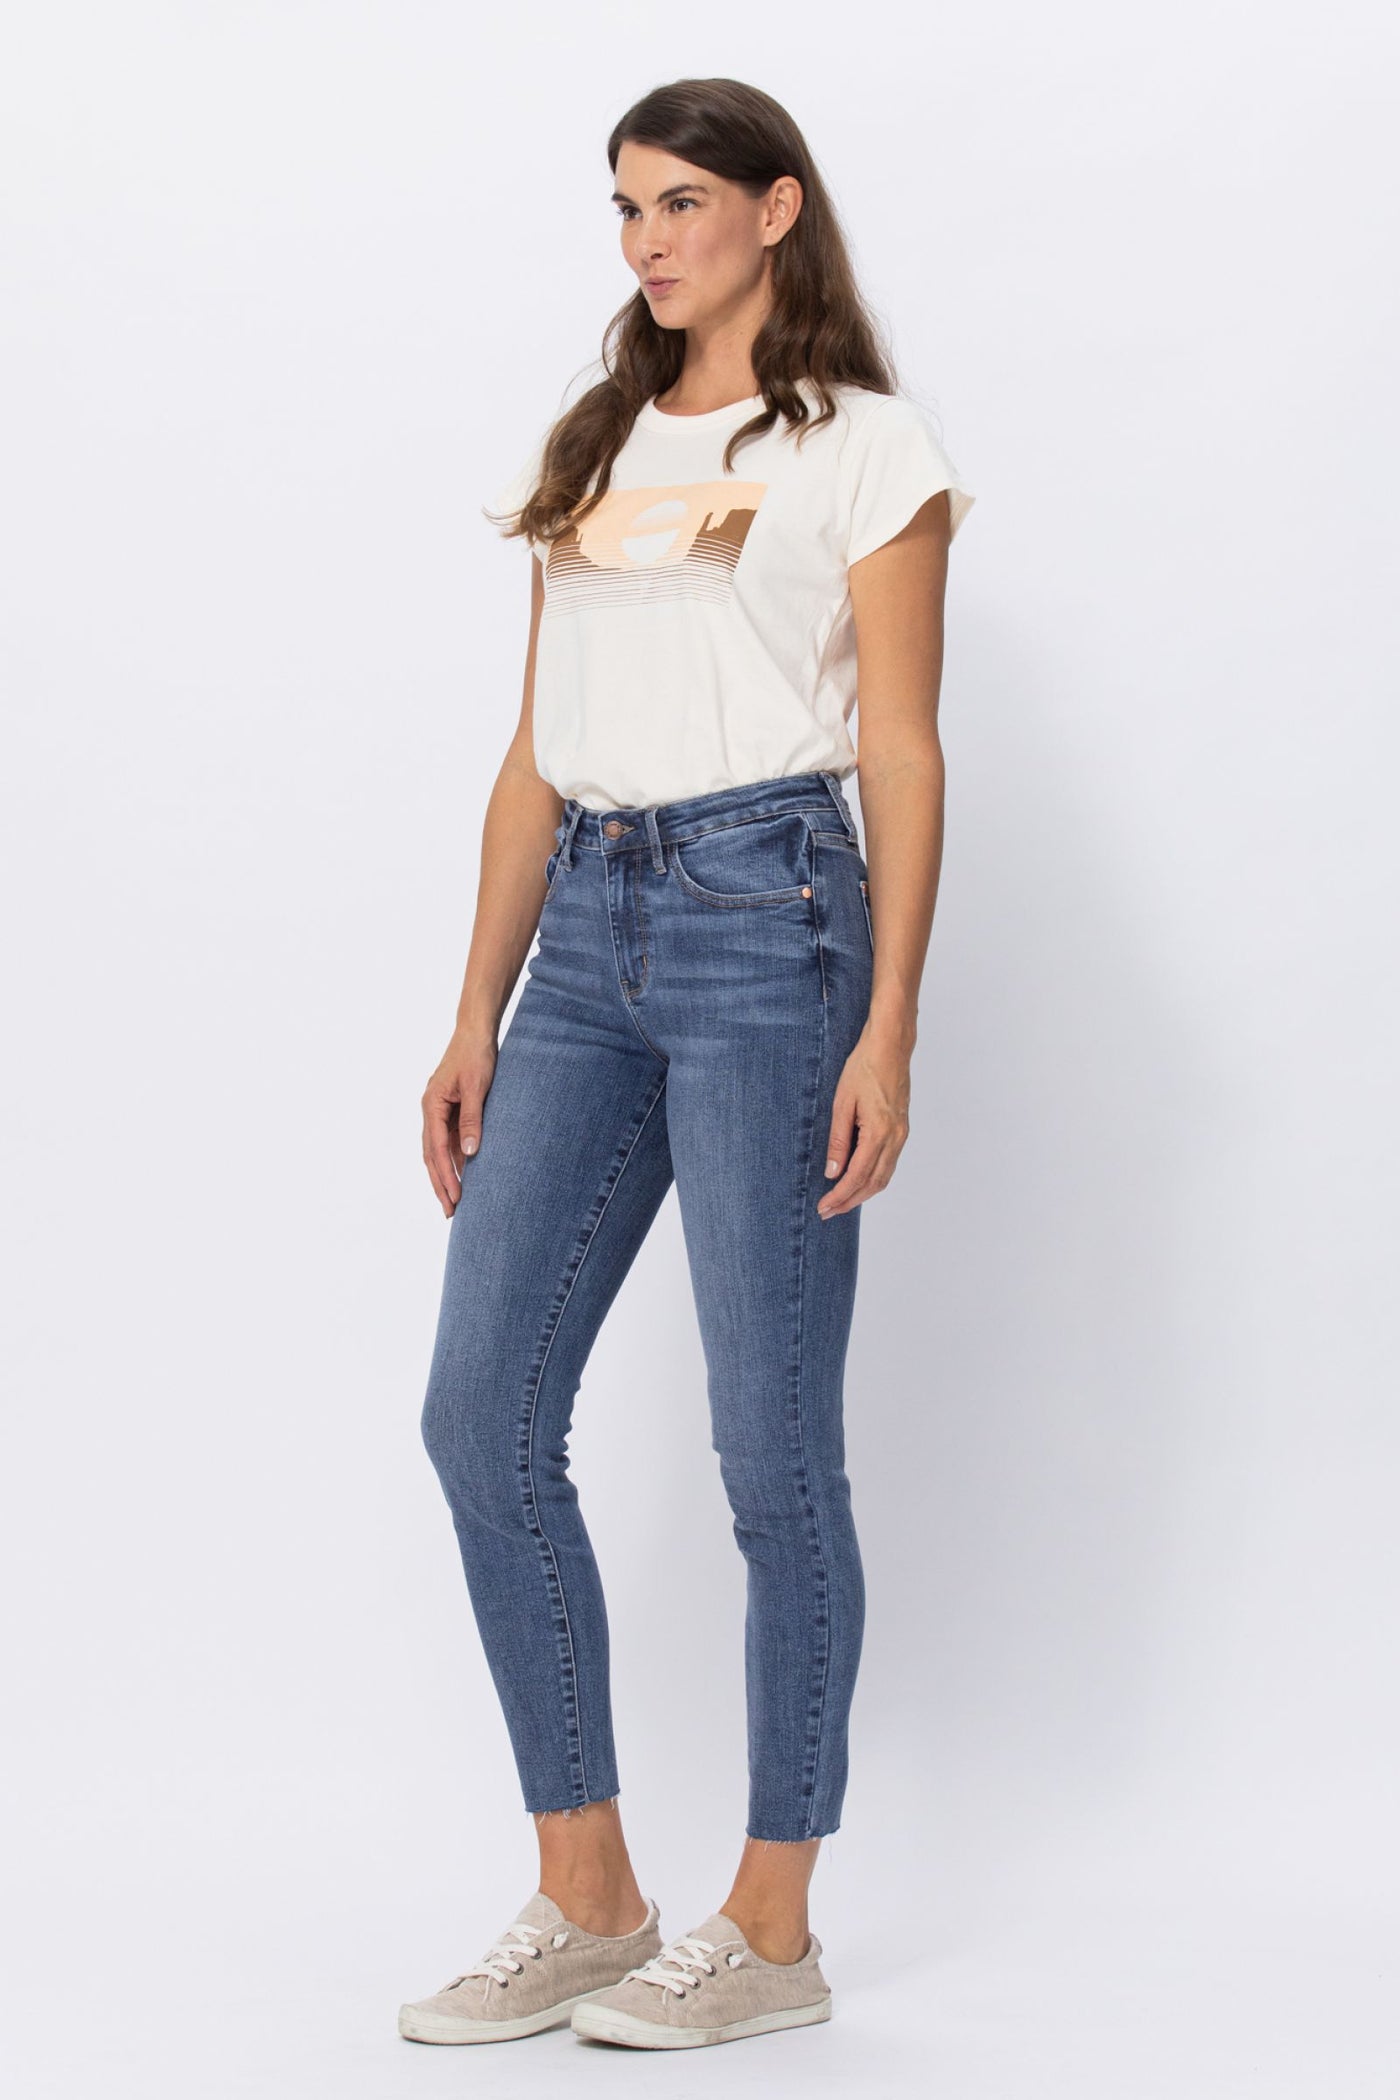 Judy Blue Embroidered Pocket Skinny Jeans